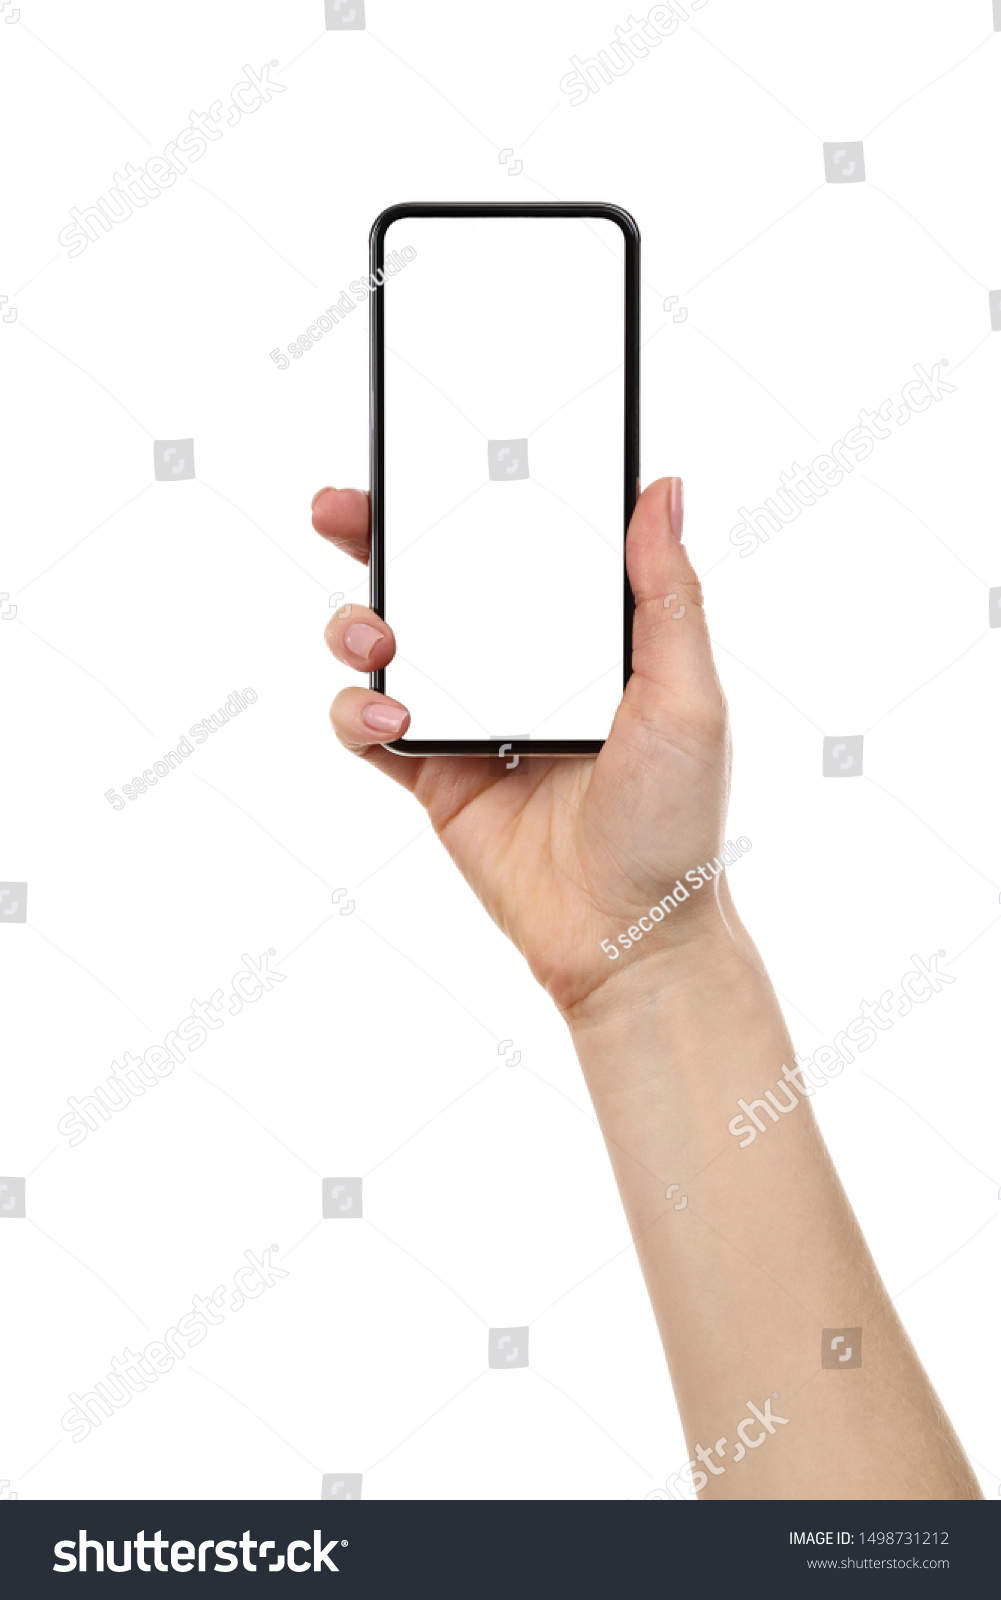 Smartphone in female hand isolated on white background #1498731212